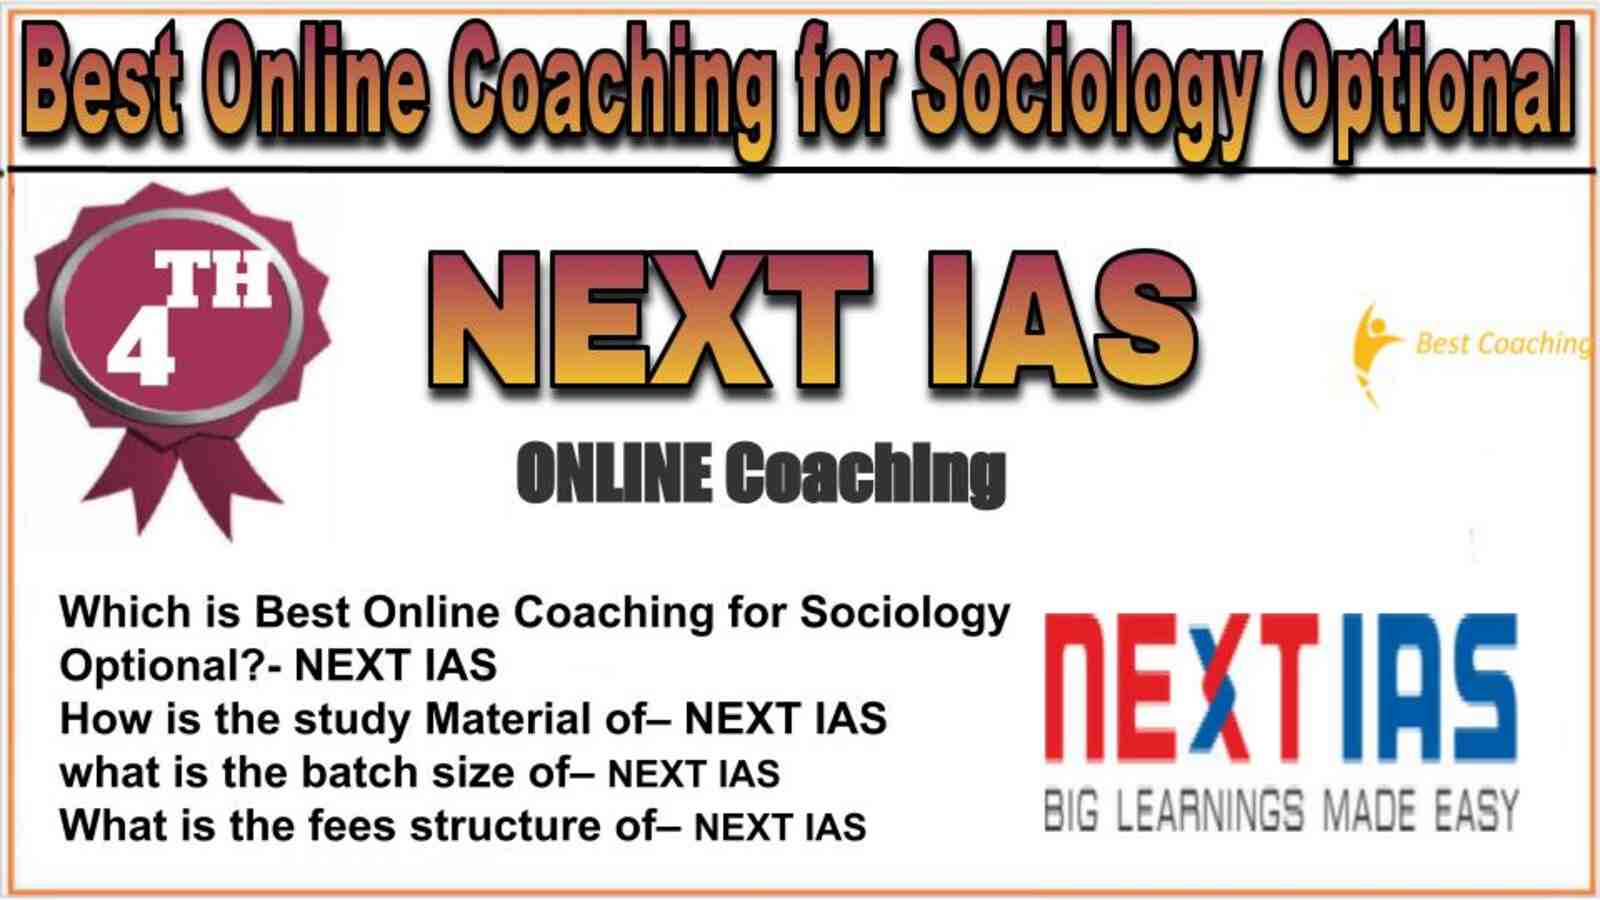 Rank 4 best online coaching for Sociology Optional